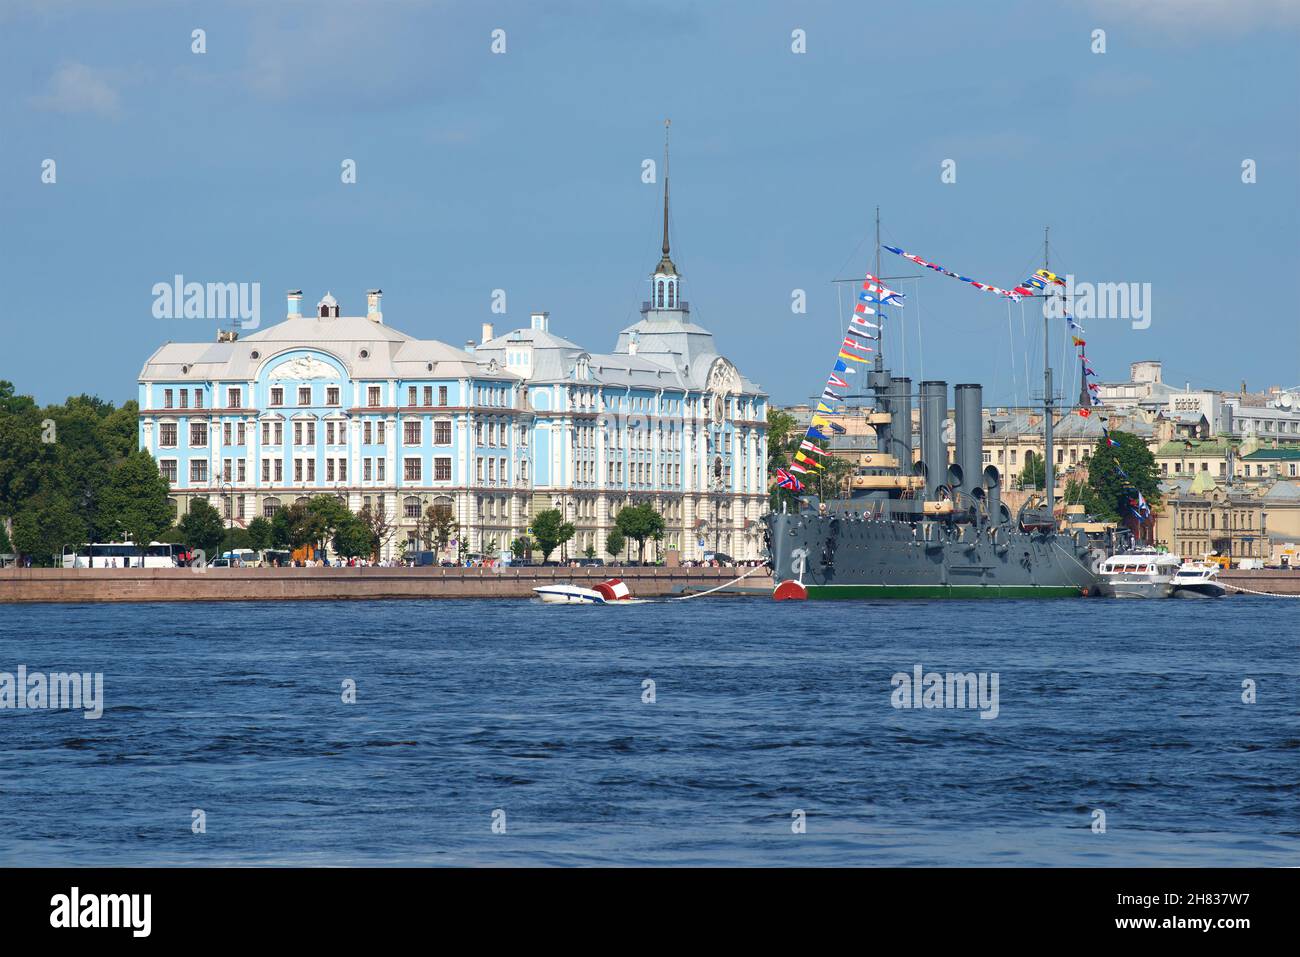 ST. PETERSBURG, RUSSIA - JULY 28, 2016: A view of the Nakhimov naval Academy and the cruiser 'Aurora' a sunny day in july Stock Photo